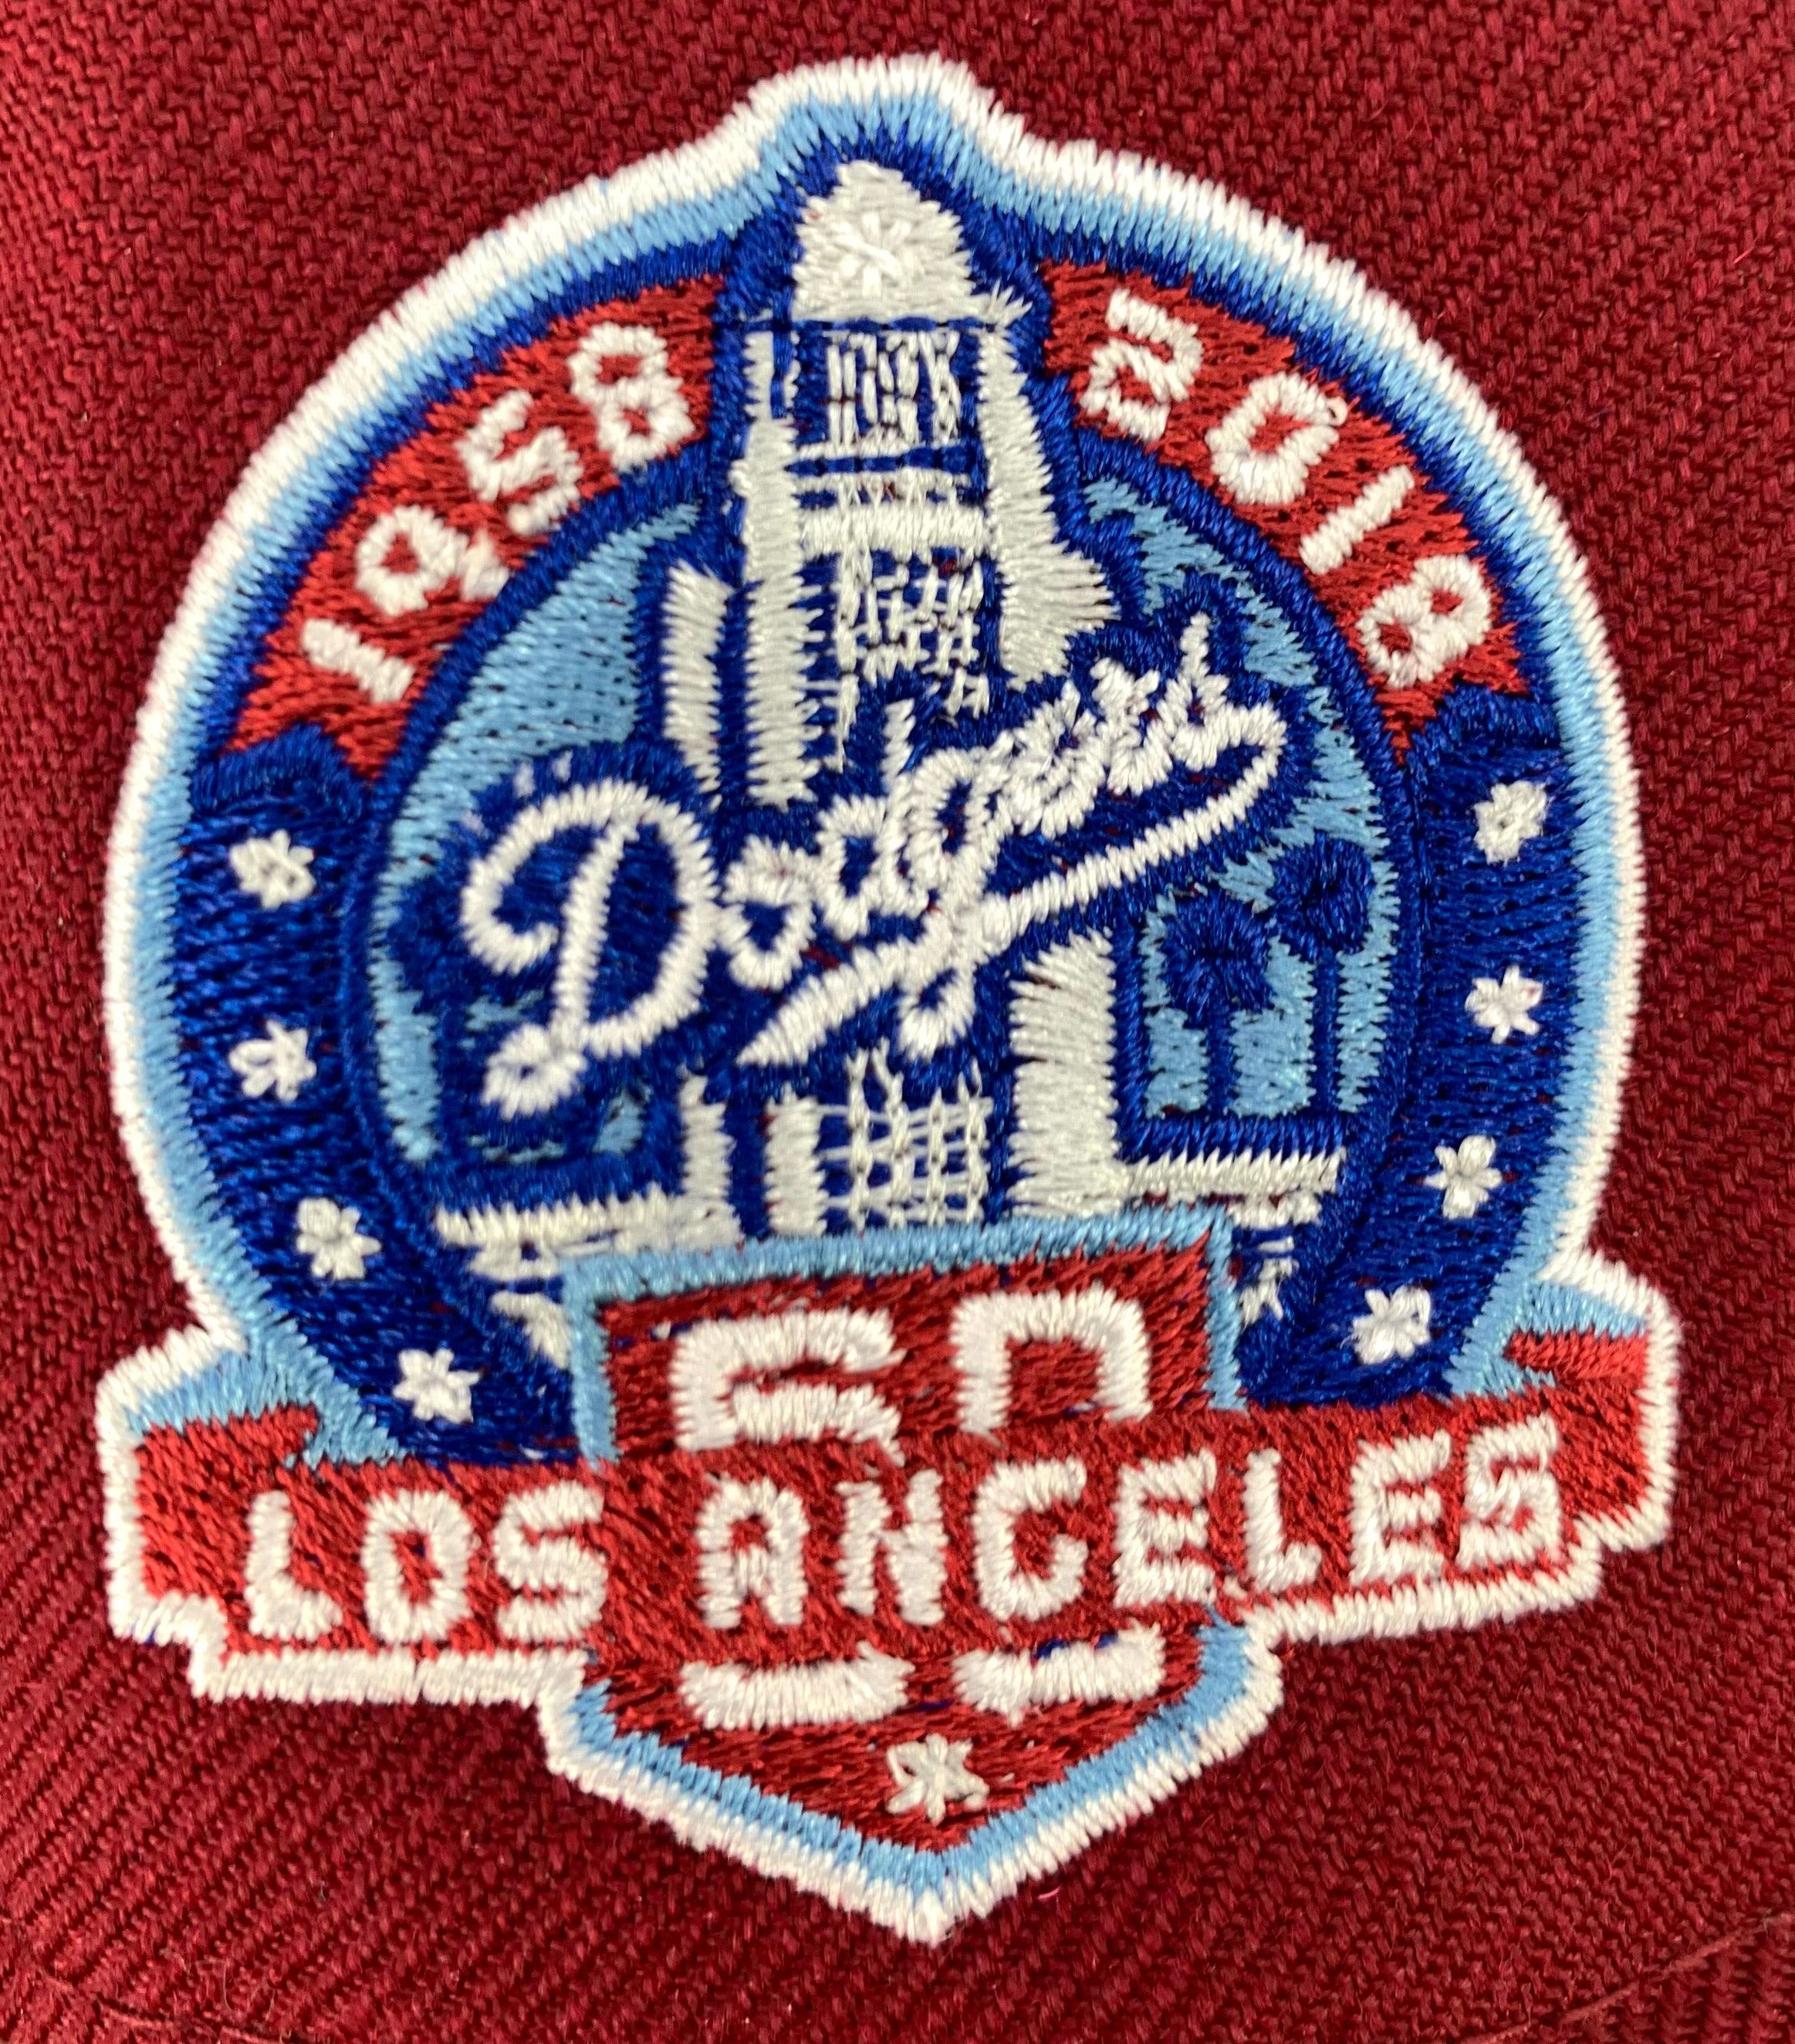 LOS ANGELES DODGERS "DR PEPPER" (60TH ANNIVERSARY) NEW ERA 59FIFTY FITTED (SKY BLUE UNDER VISOR) (S)